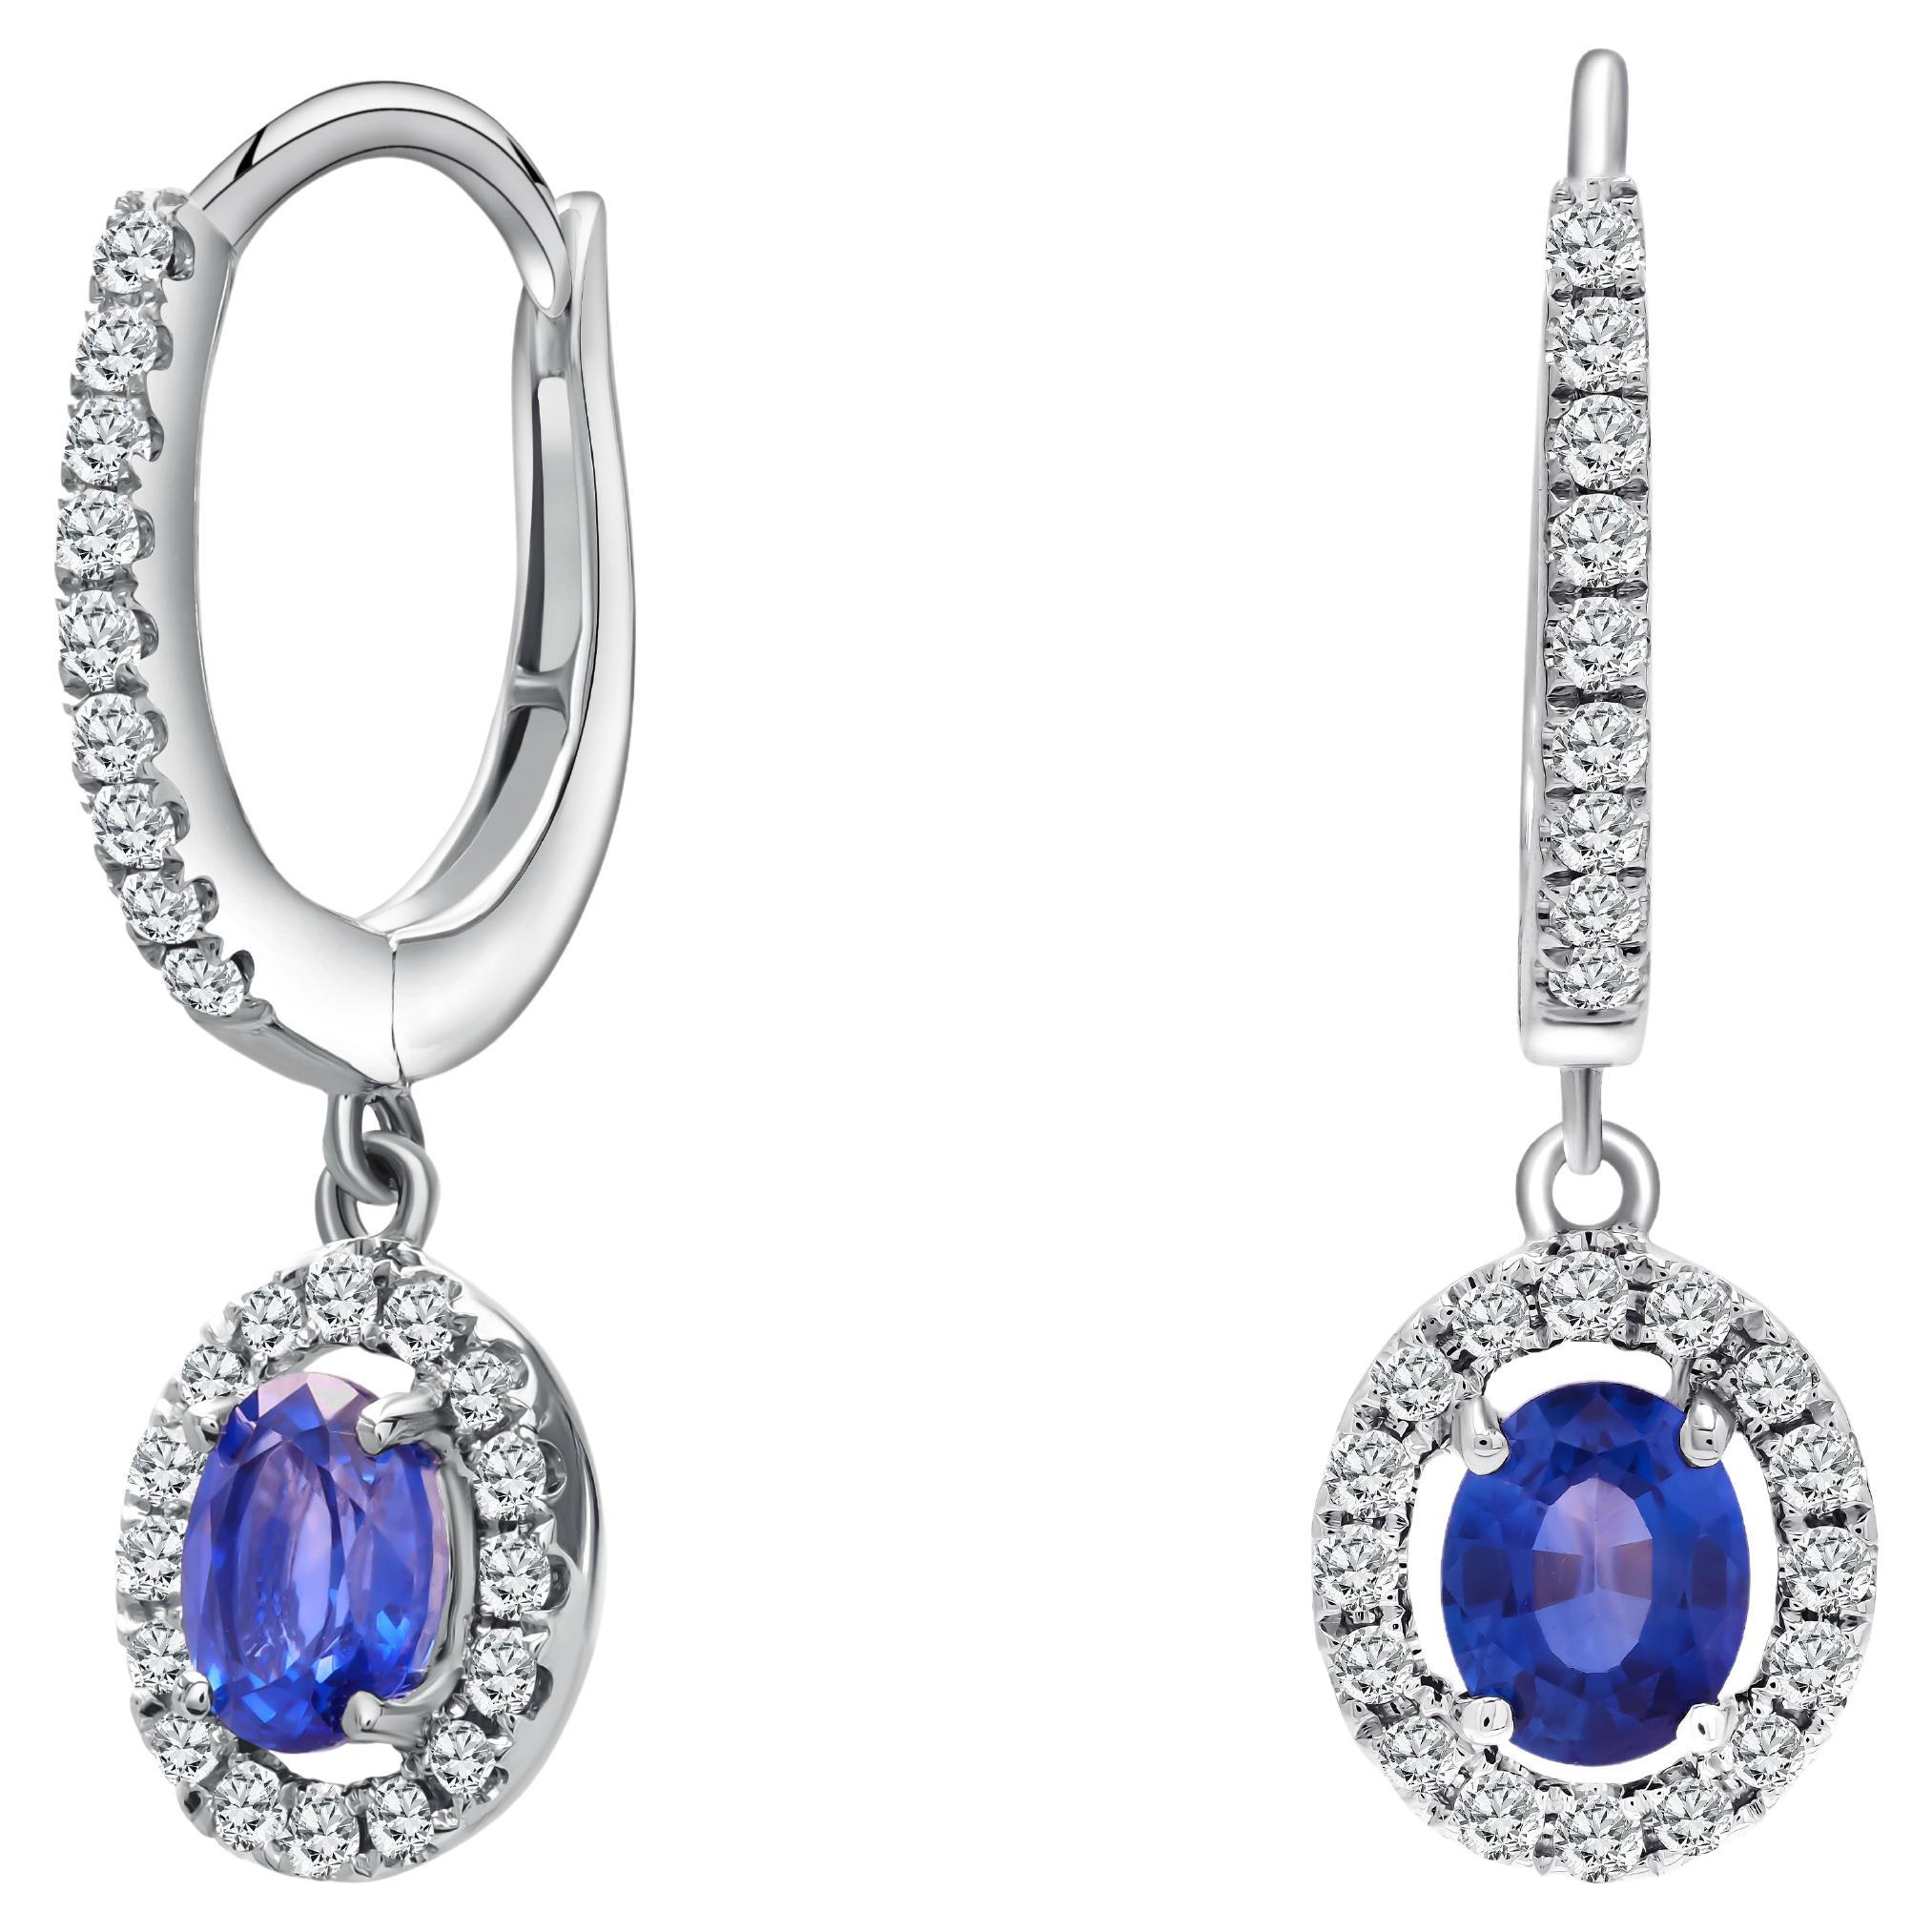 0.95 Carat Round Blue Sapphire and 0.33 Carat Diamond Earring in 18W ref118 For Sale